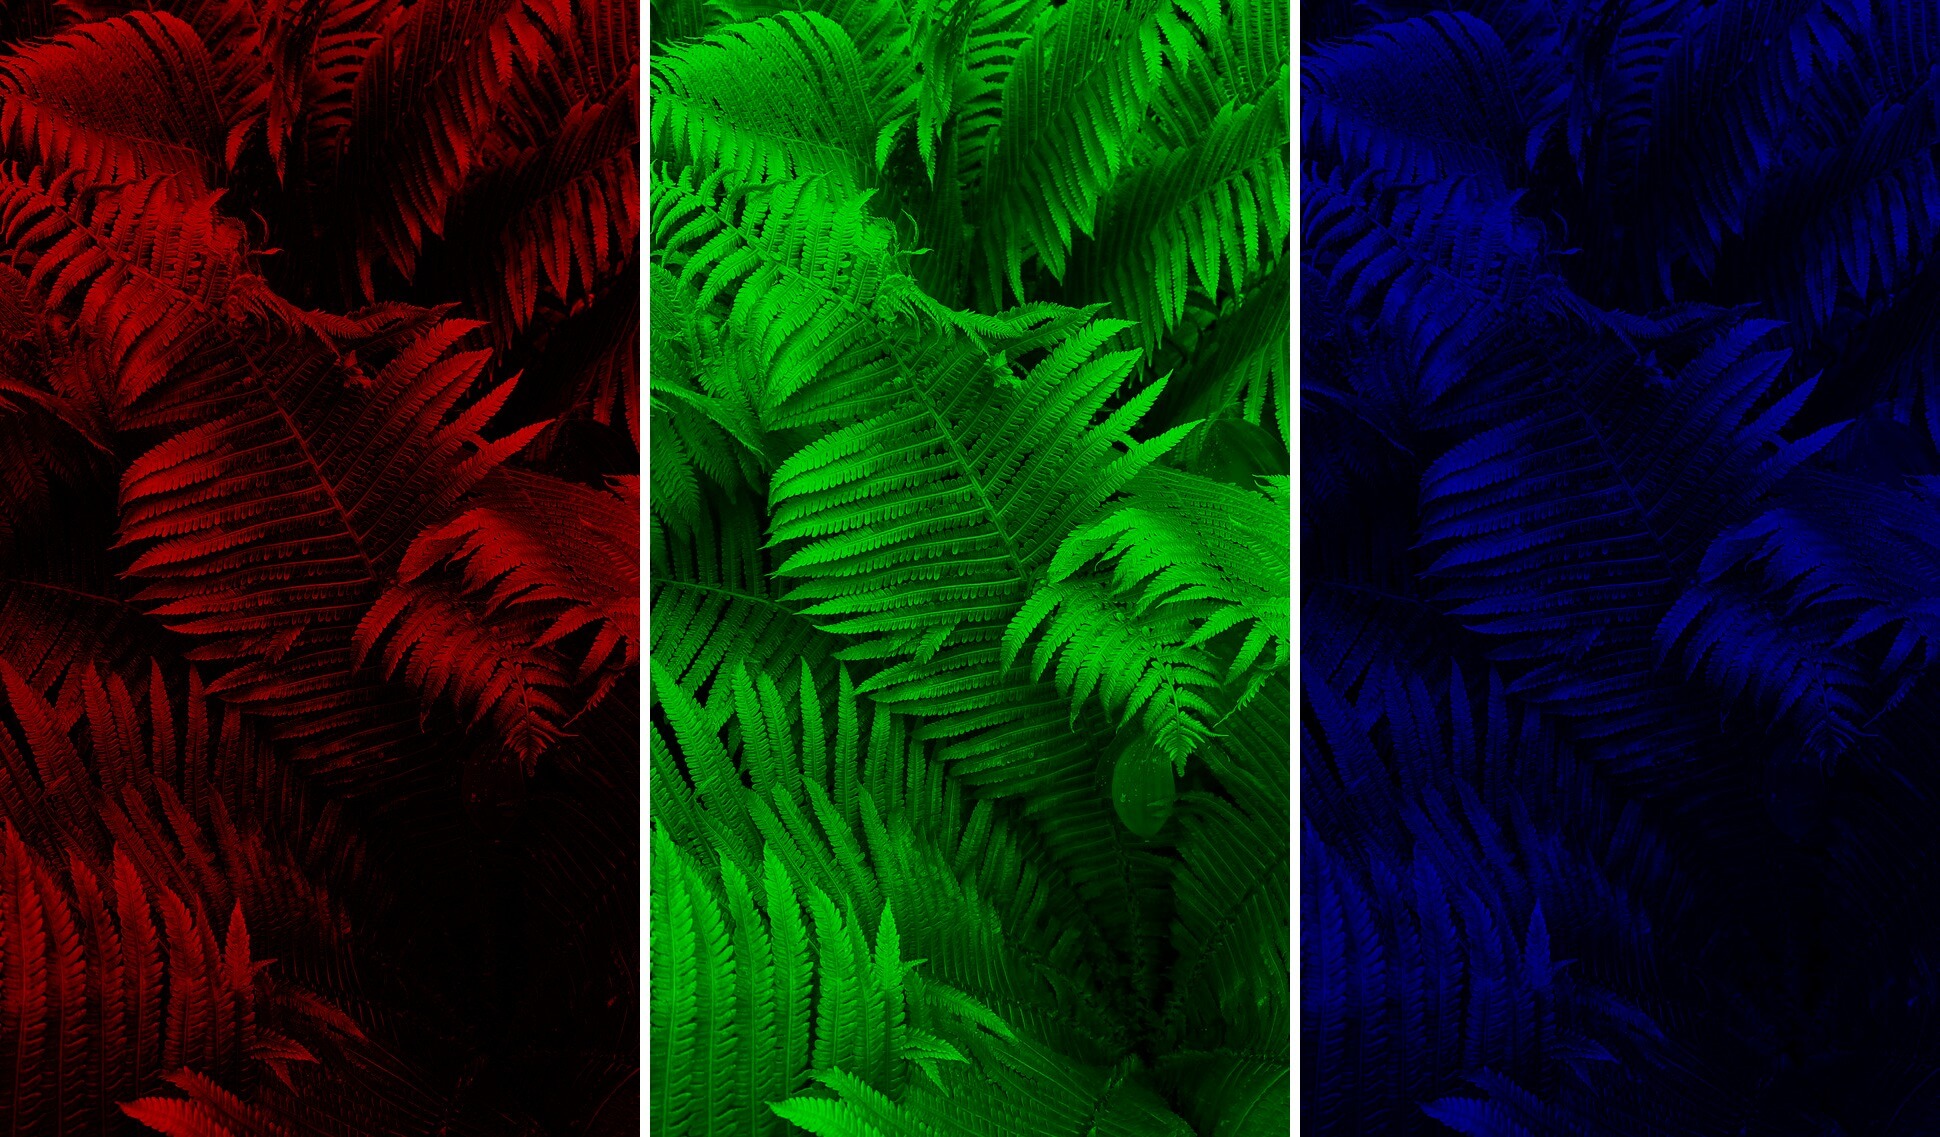 This example decomposes a full-color JPG photo of a fern into three single-channel photos. The left photo shows the "red" channel, the middle photo shows the "green" channel, and the right photo shows the "blue" channel. (Source: Pexels.)